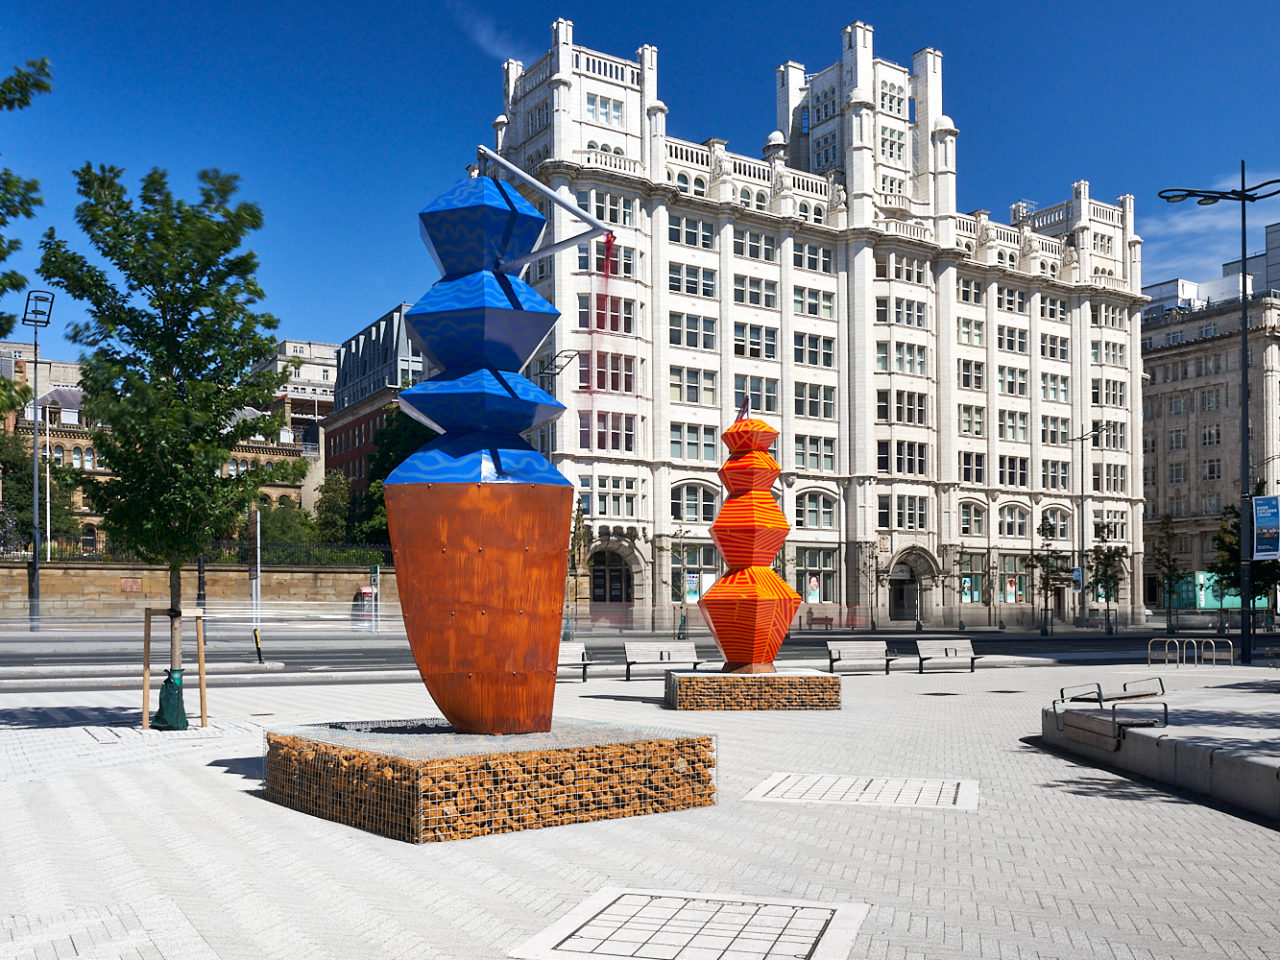 Two totems on Princes Dock, one geometrically painted red and yellow and one painted blue and the bottom half is covered in rust.